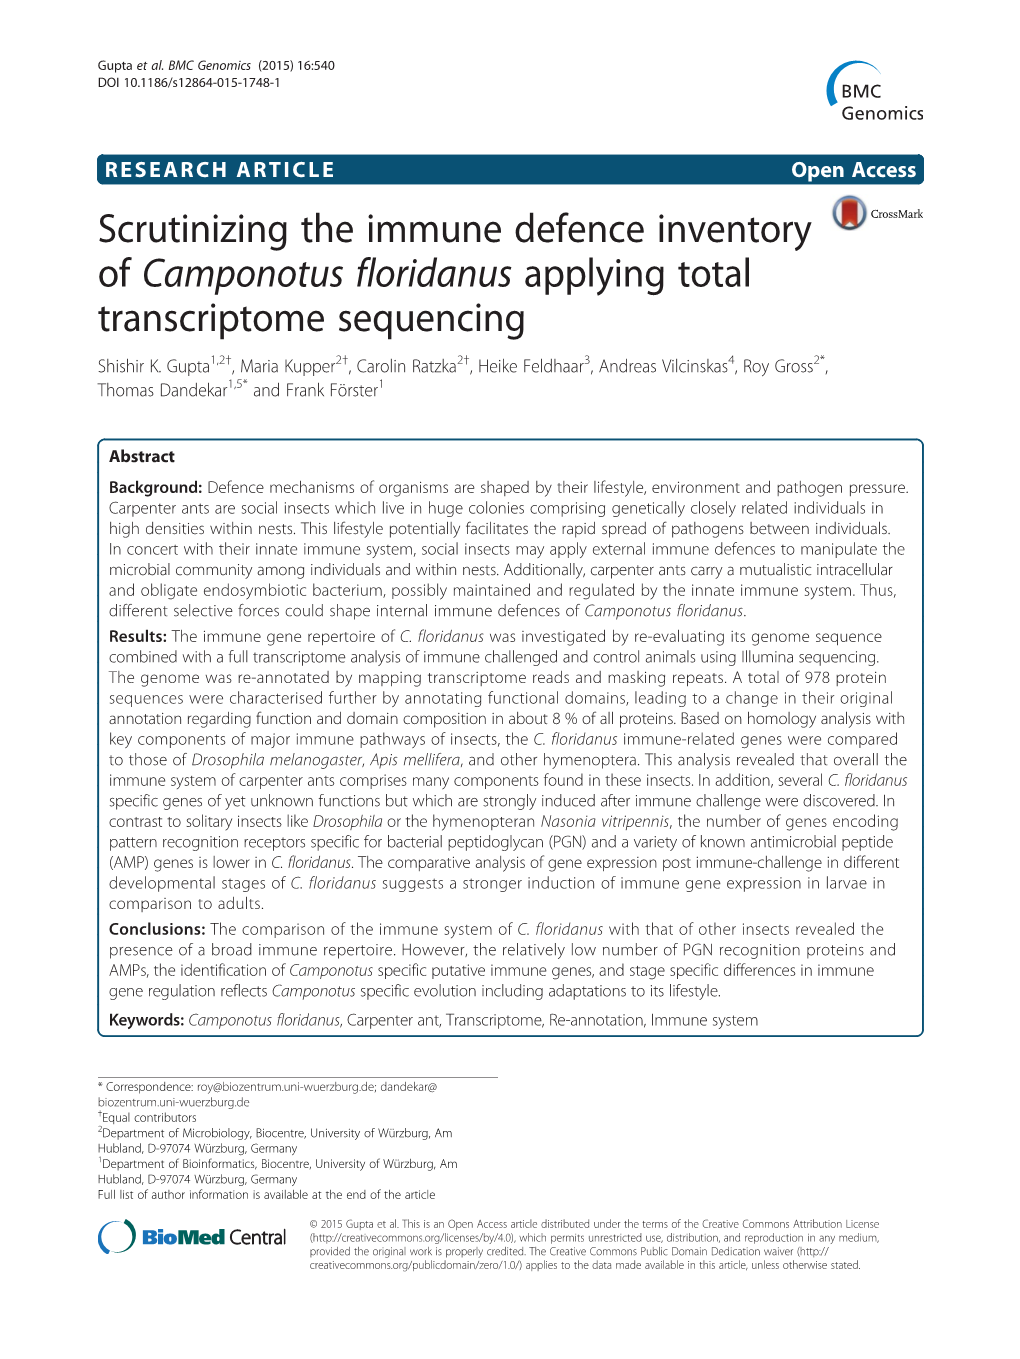 Scrutinizing the Immune Defence Inventory of Camponotus Floridanus Applying Total Transcriptome Sequencing Shishir K